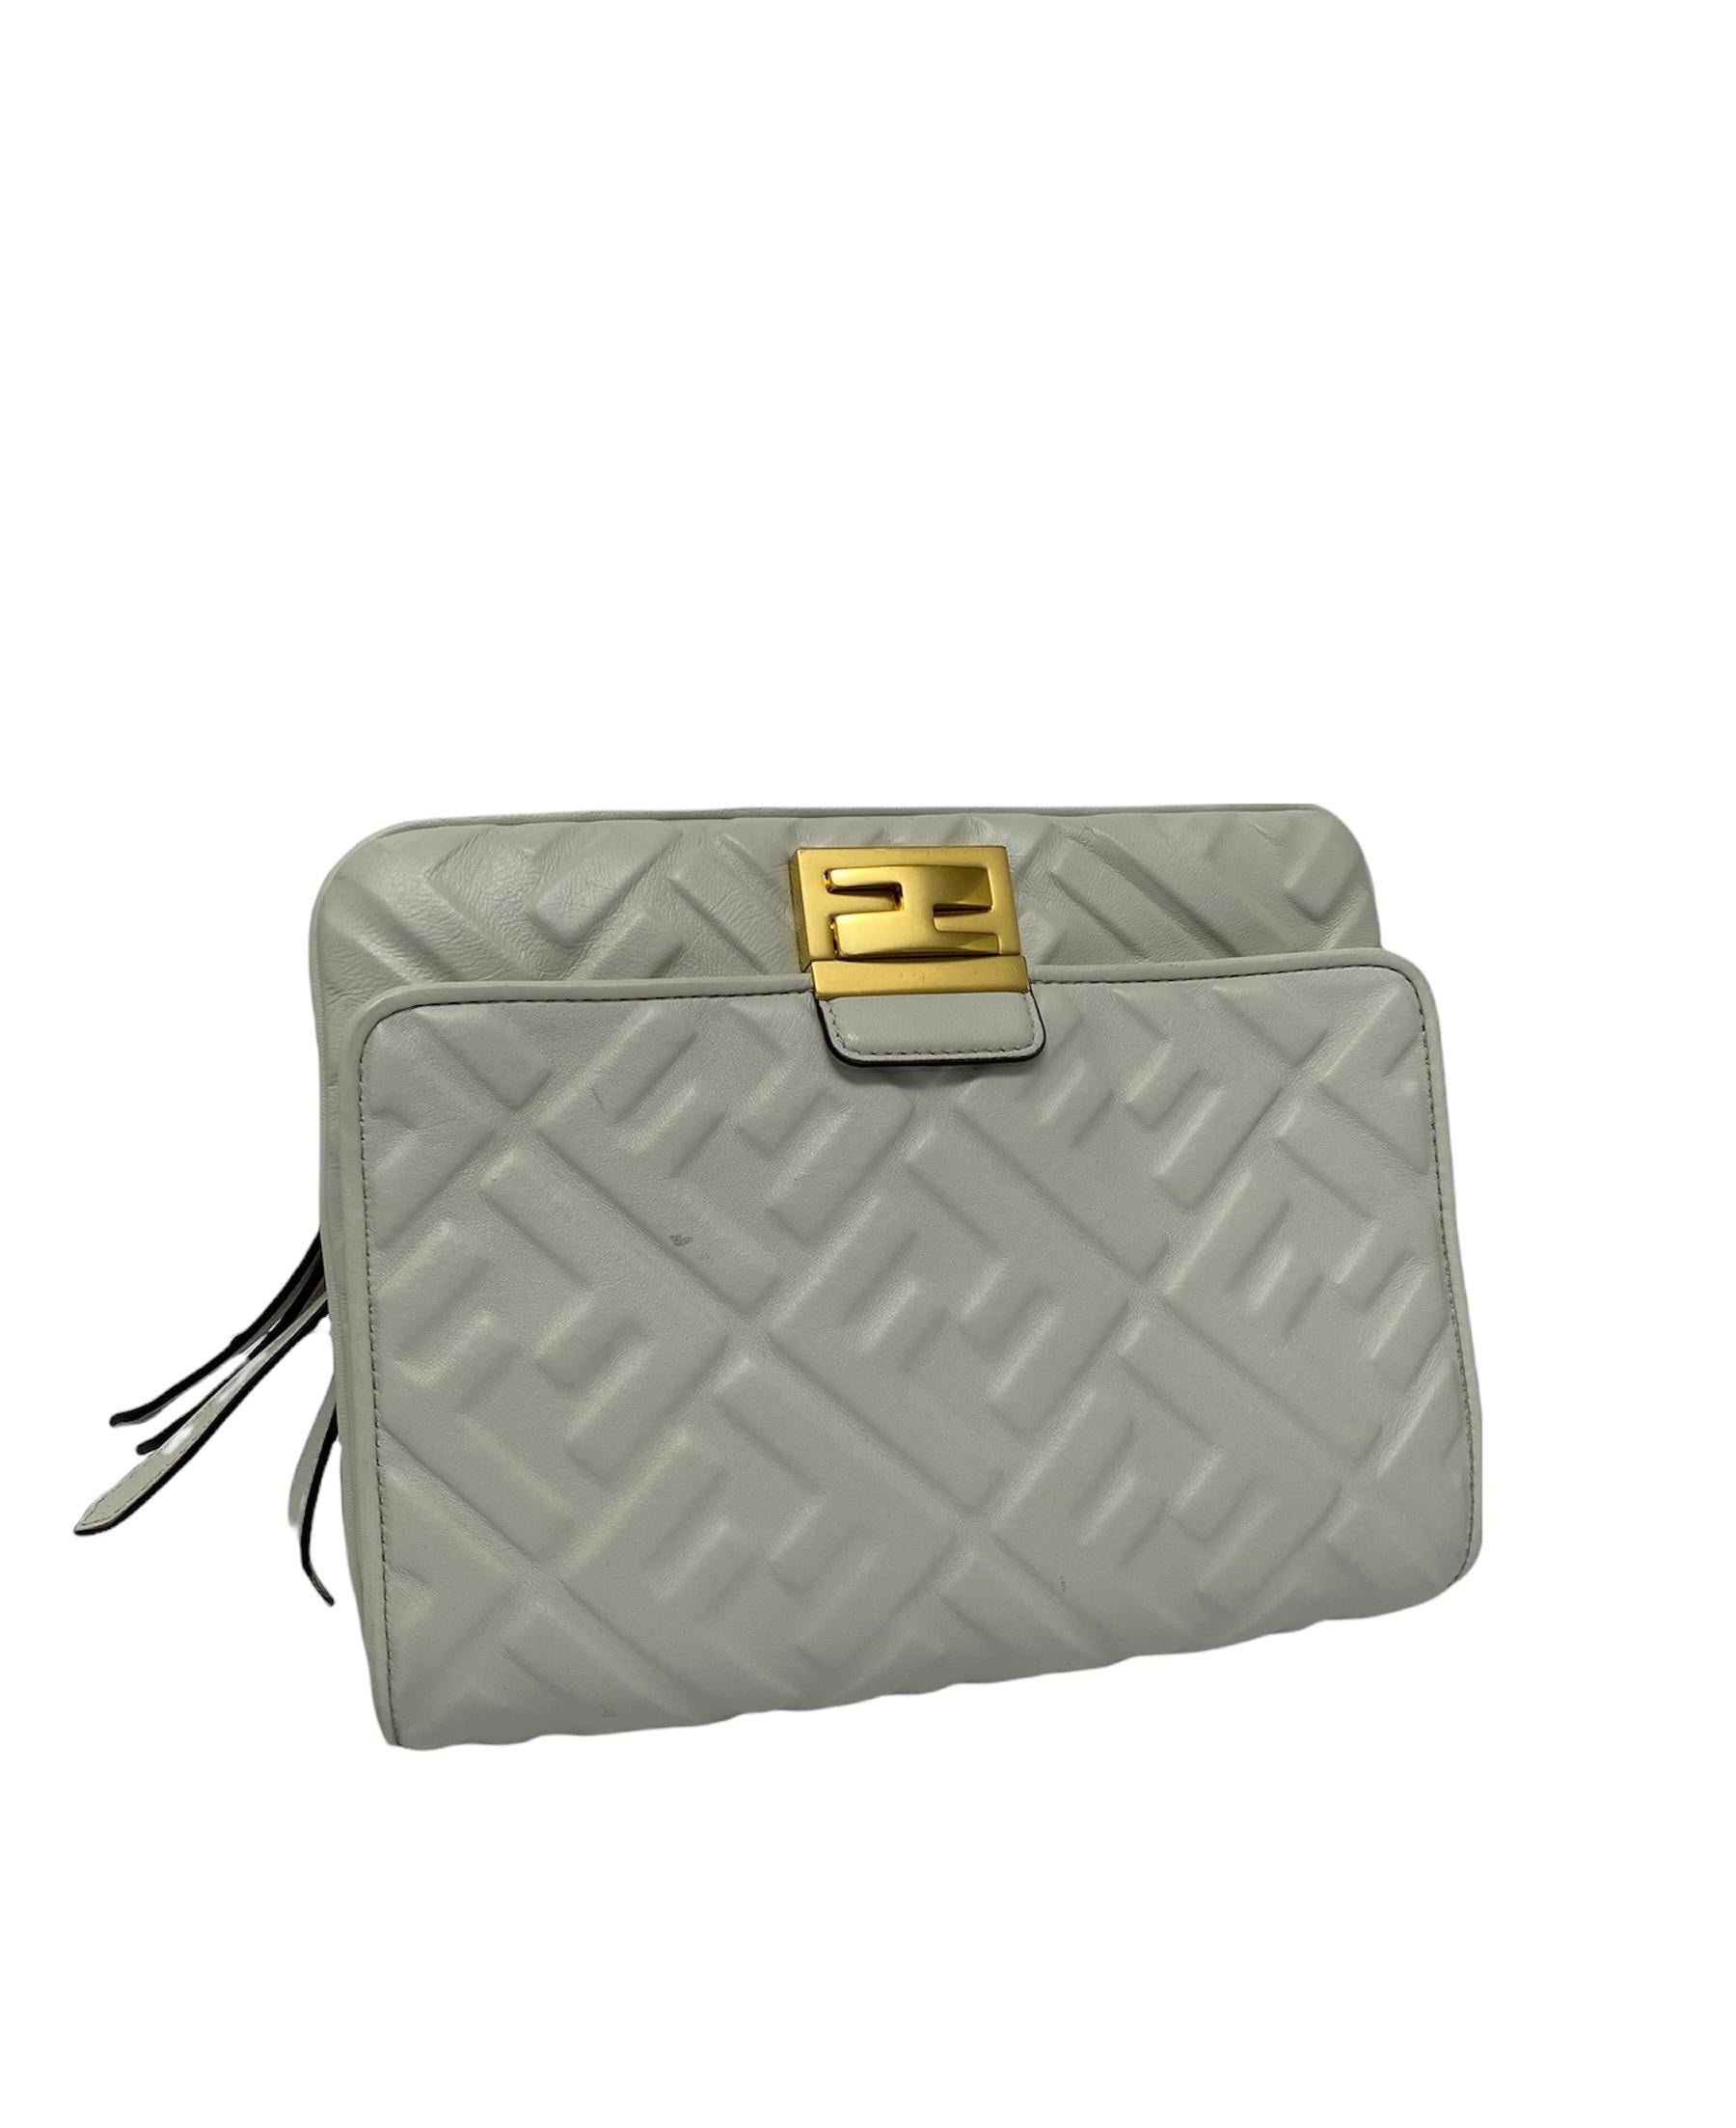 Upside Down belt bag by Fendi in white FF Logomania leather with golden hardware.  Features an Upside Down front flap with interlocking closure. The pouch carries a central opening with zip closure, with the interior lined with a black fabric.  In